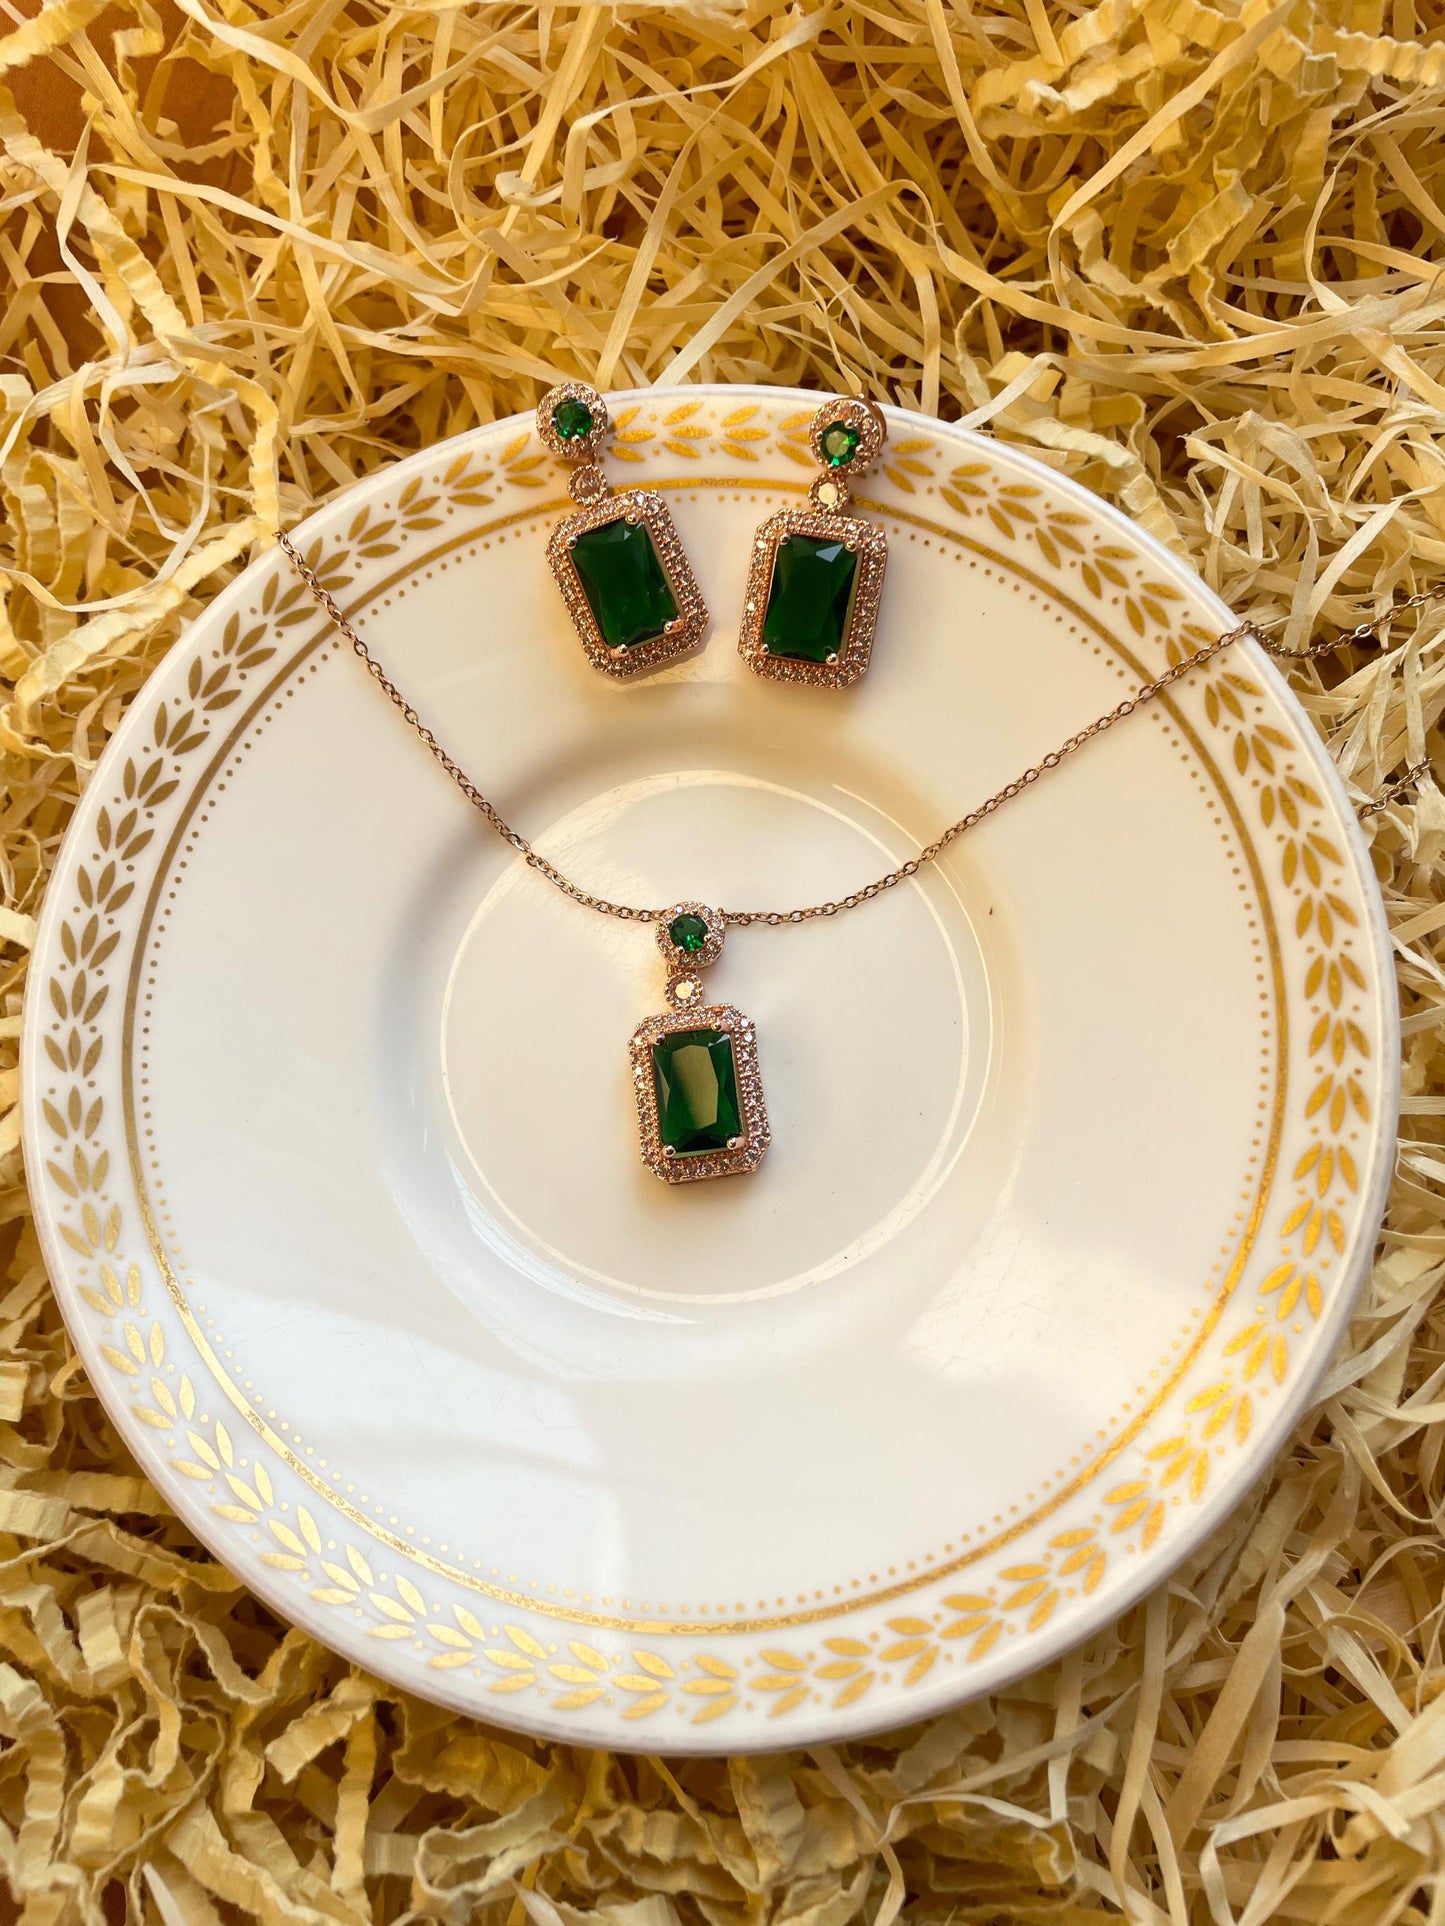 Regal Victorian Green Gemstone Necklace With Earrings Set